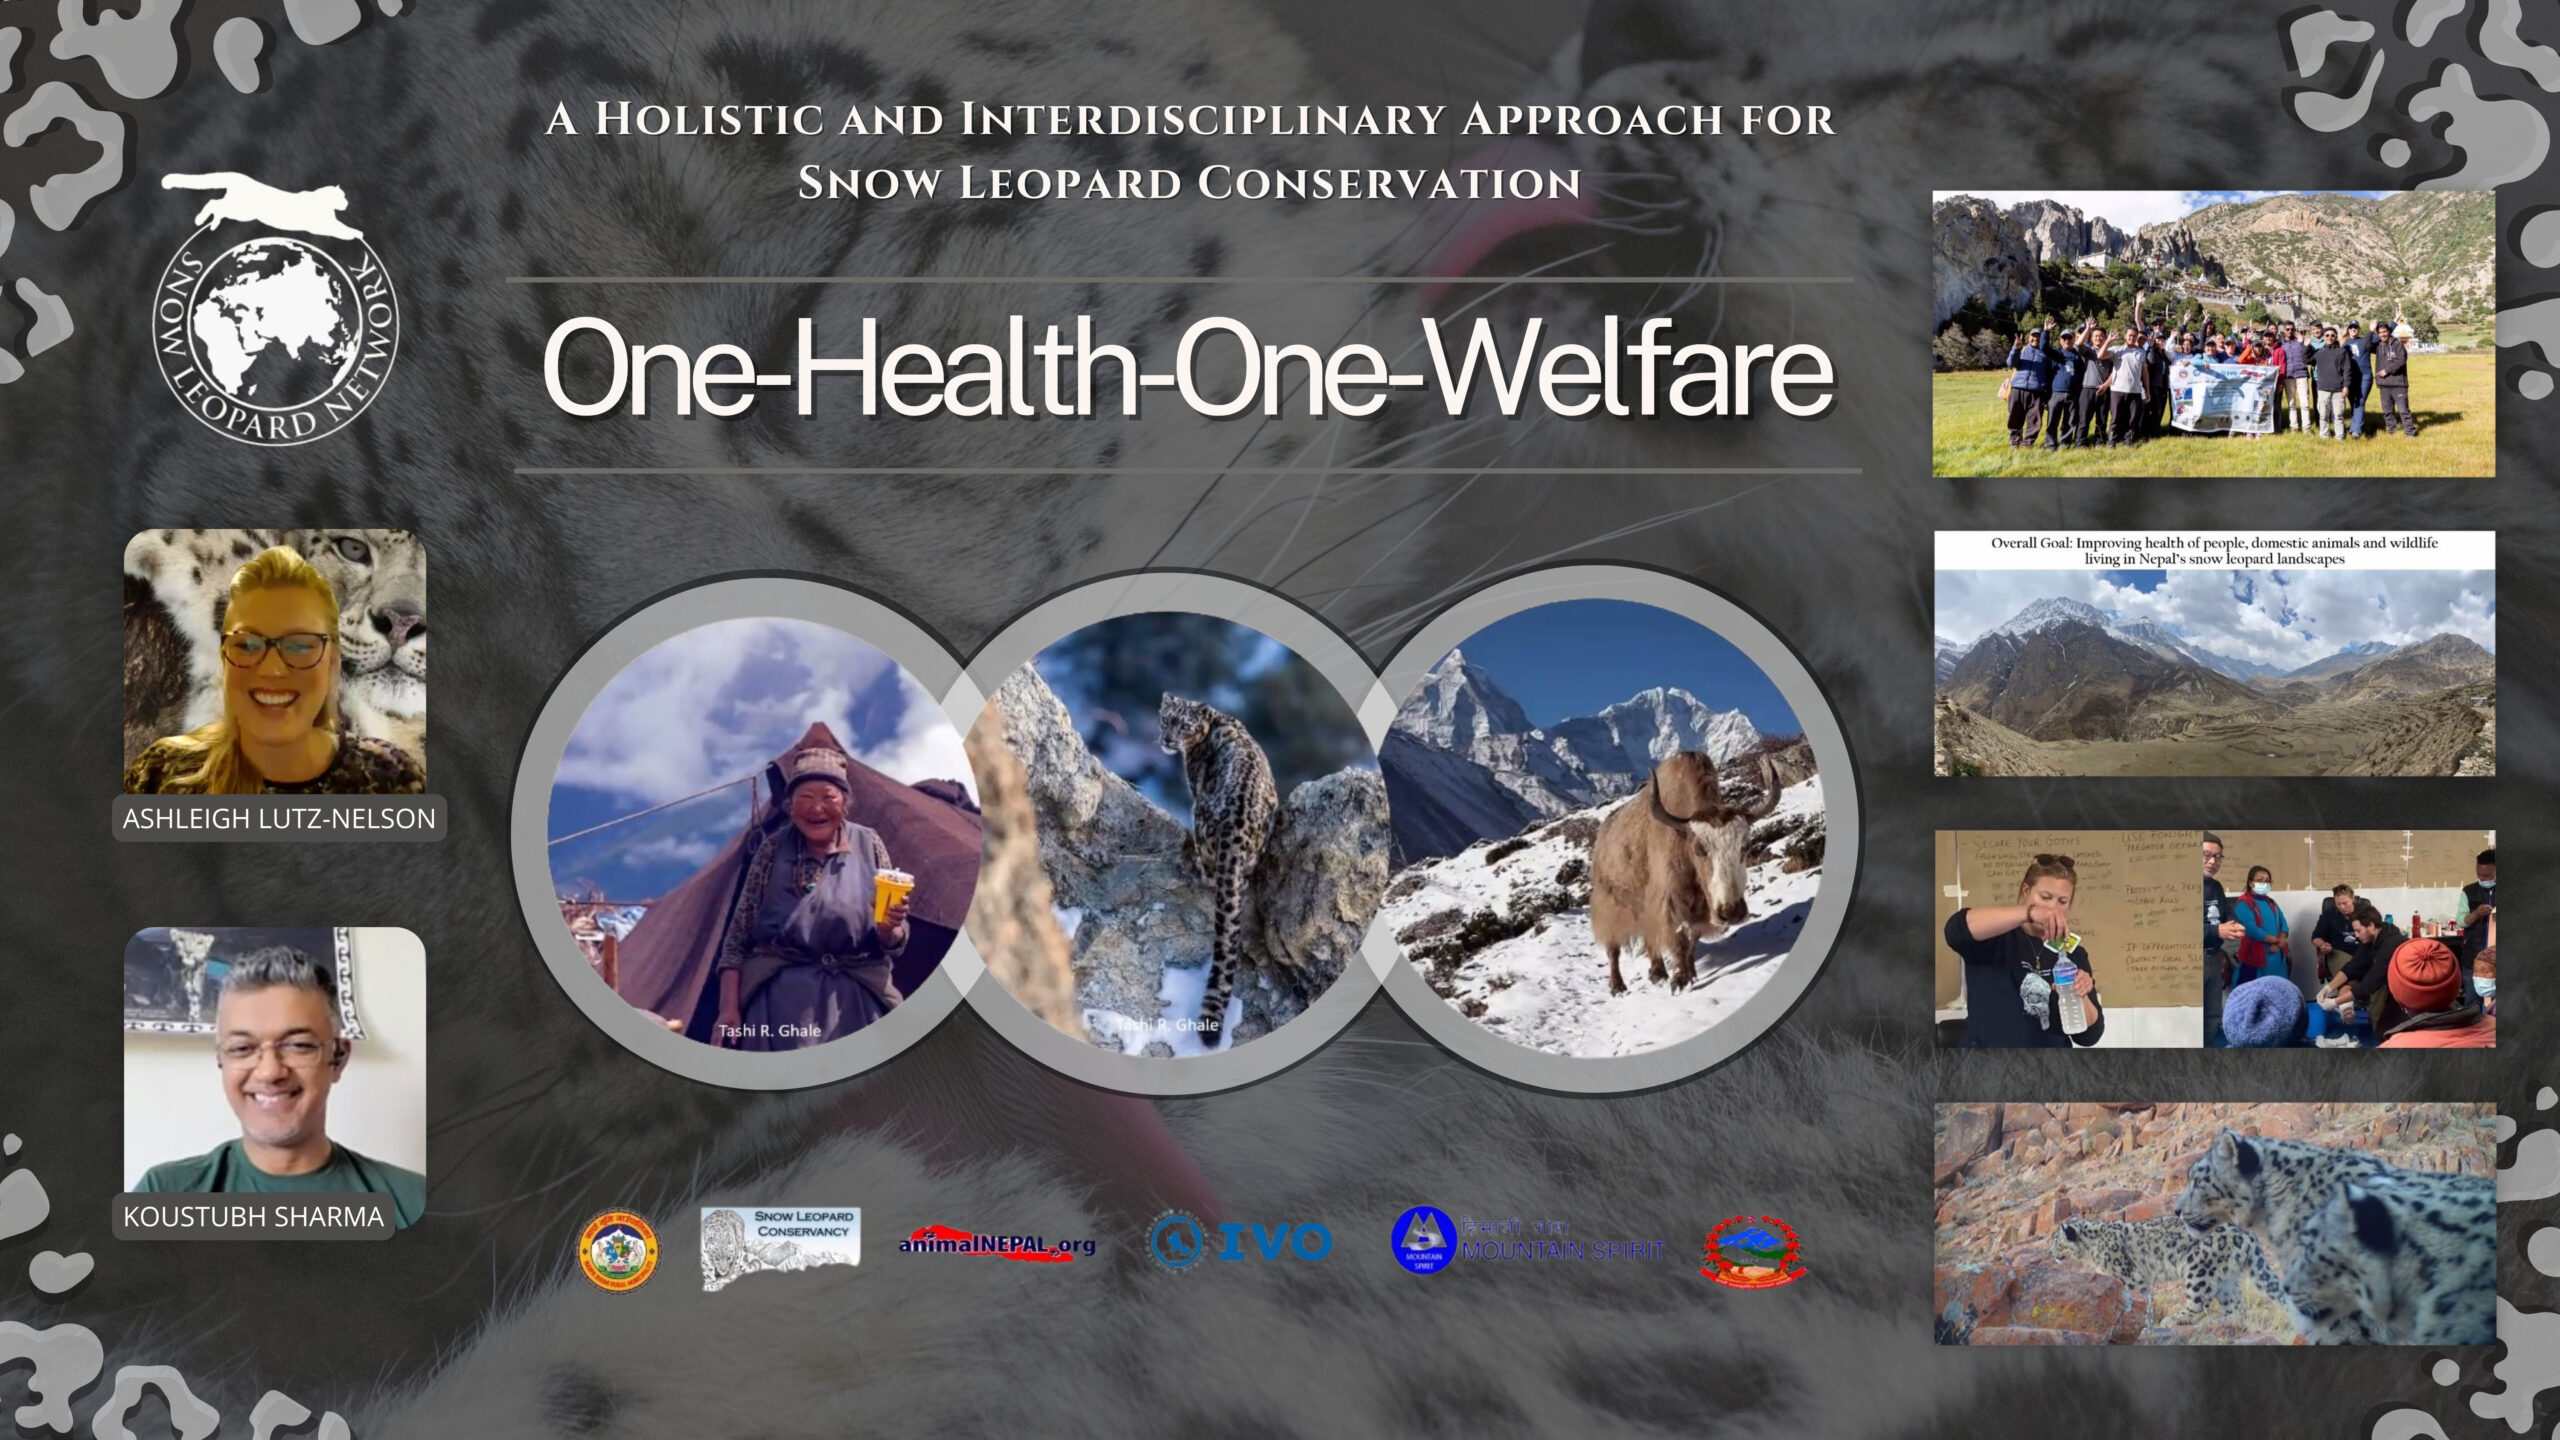 One-Health-One-Welfare: A Holistic and Interdisciplinary Approach for Snow Leopard Conservation